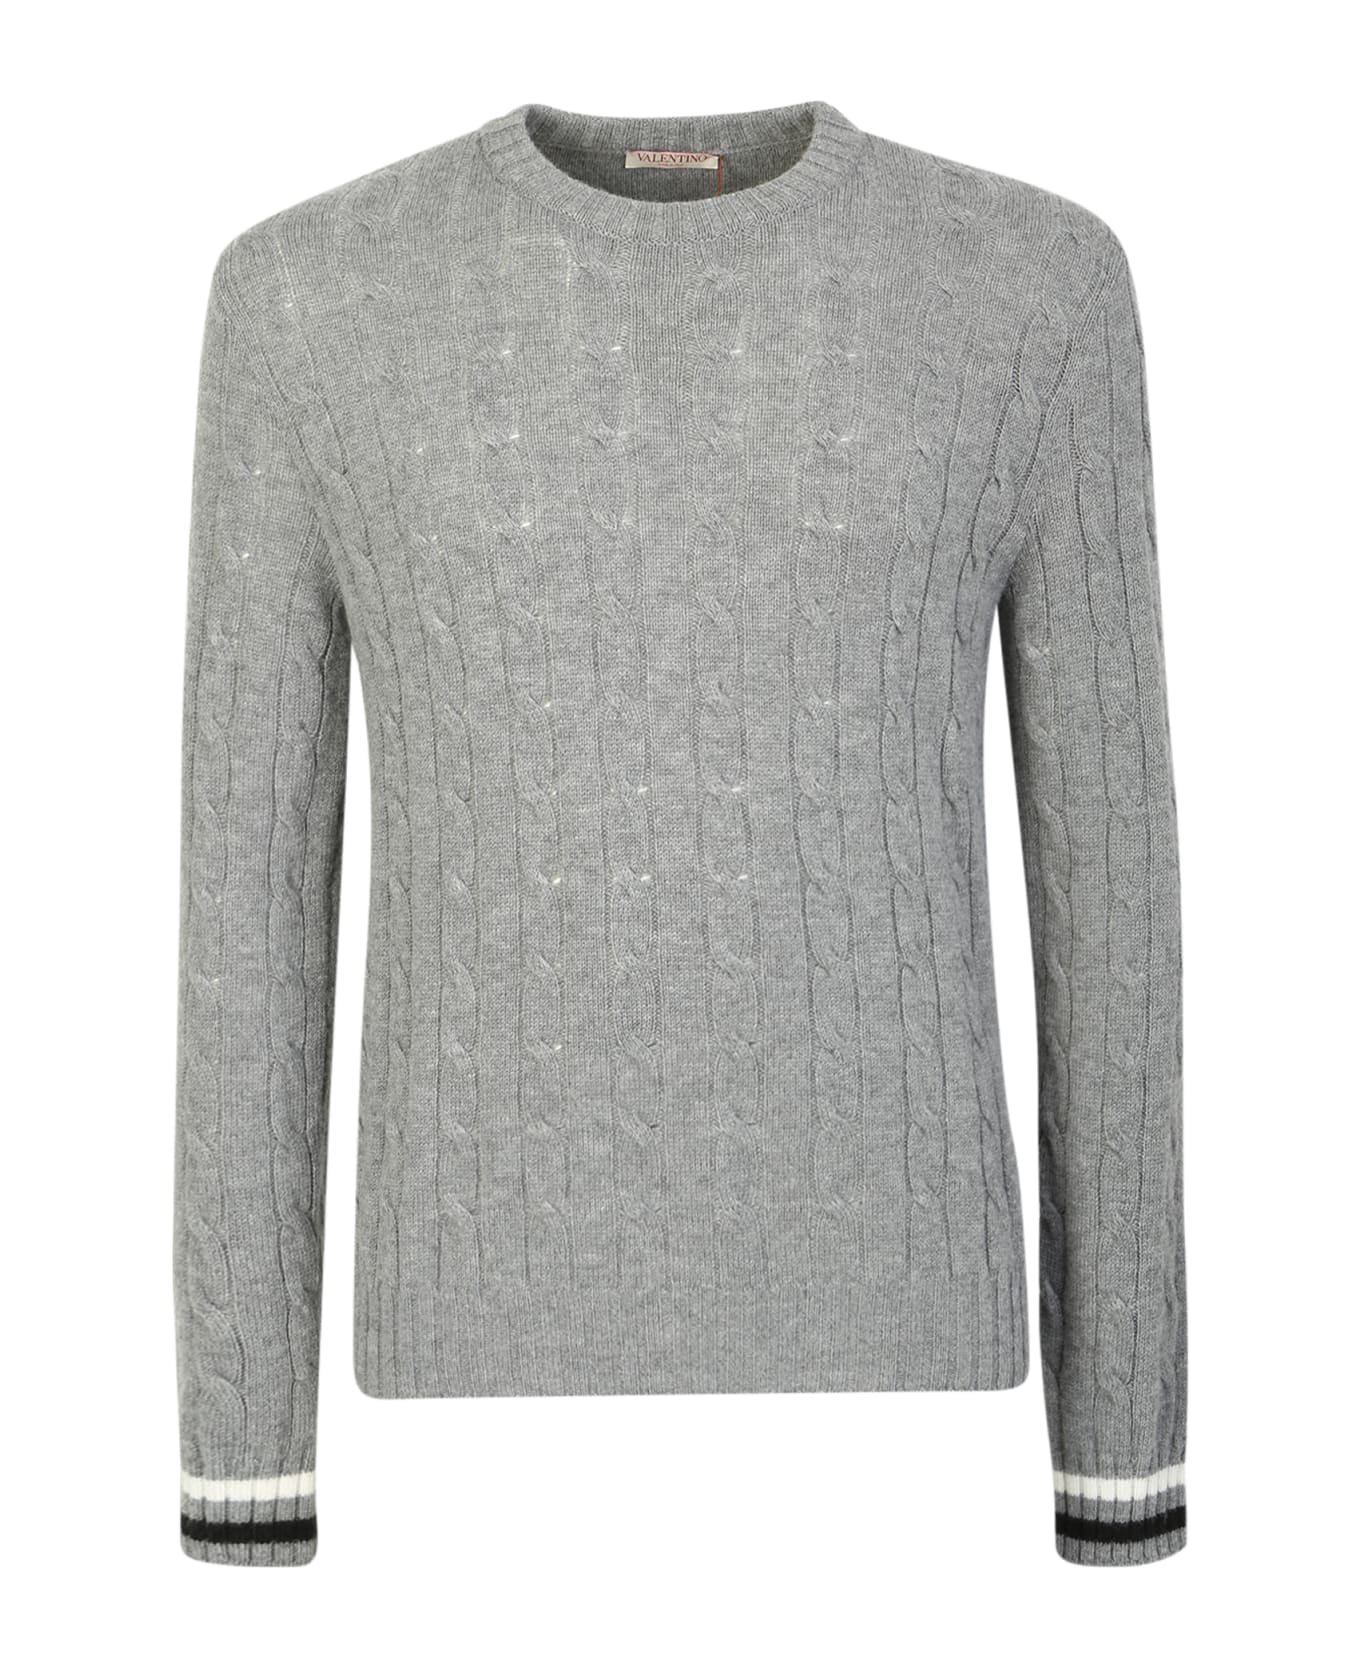 Valentino Cable Sweater Made Of Soft Virgin Wool - Grey